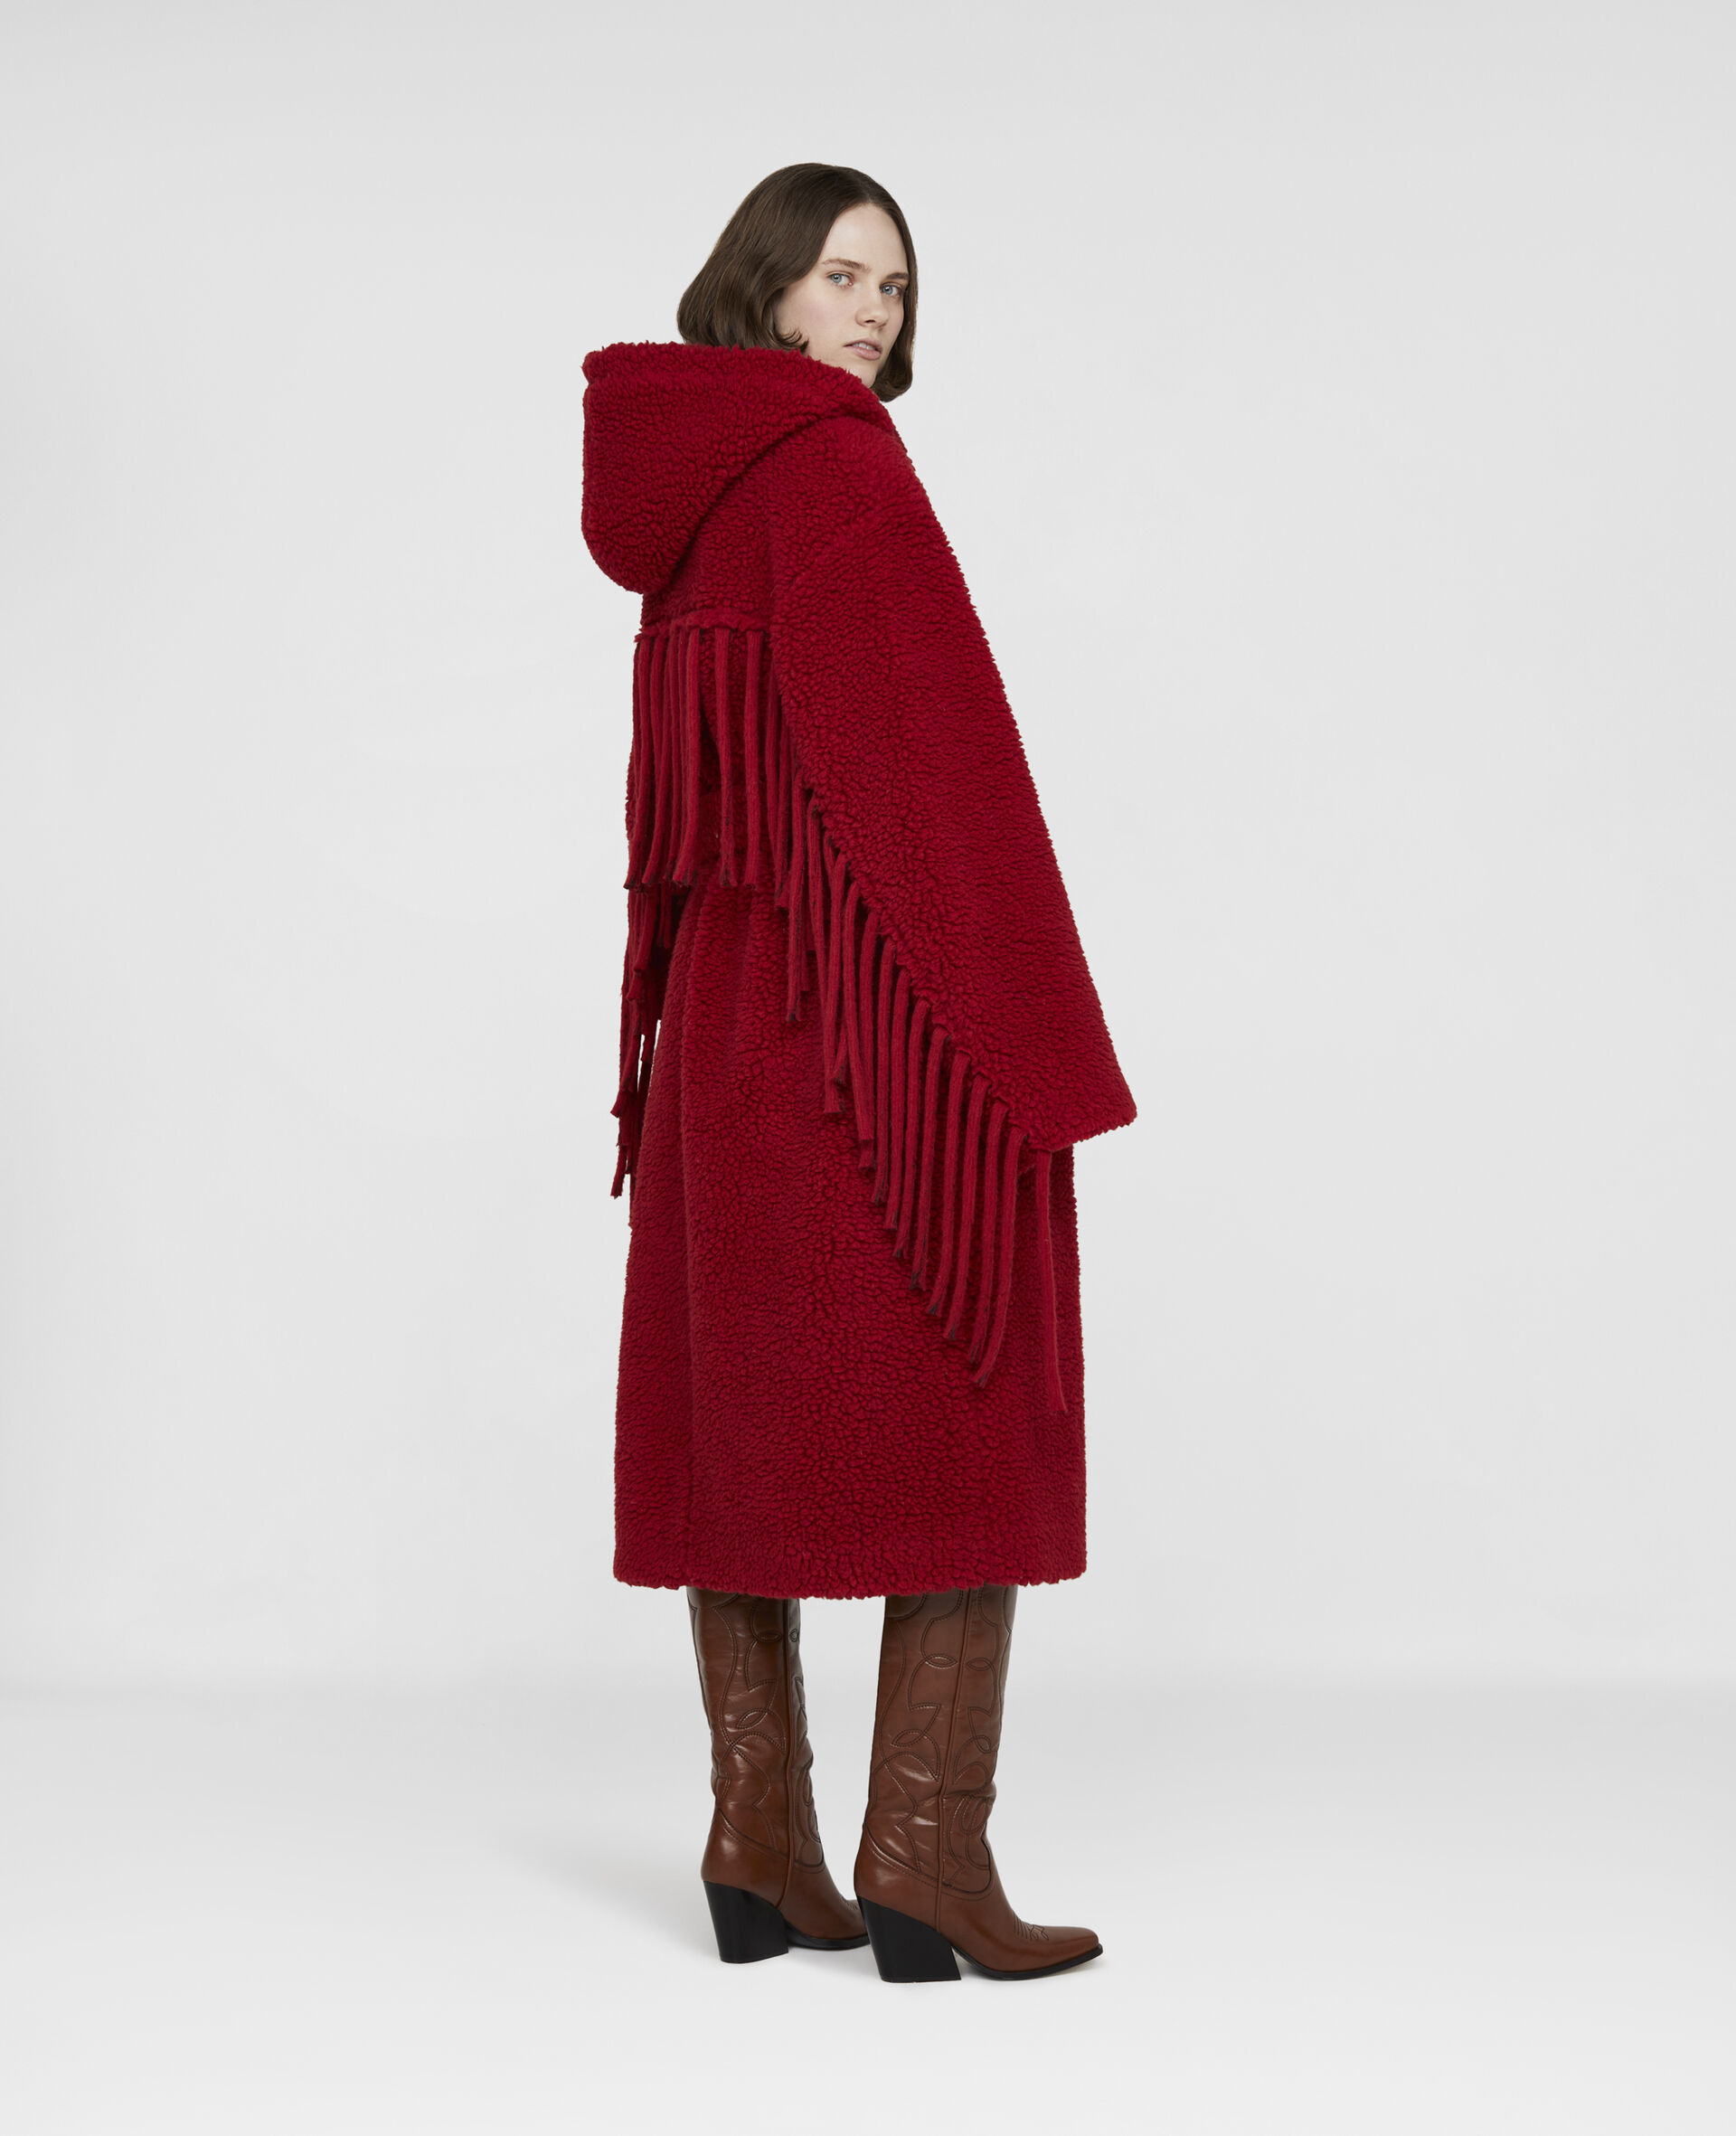 Teddy Coat with Fringing-Red-large image number 2